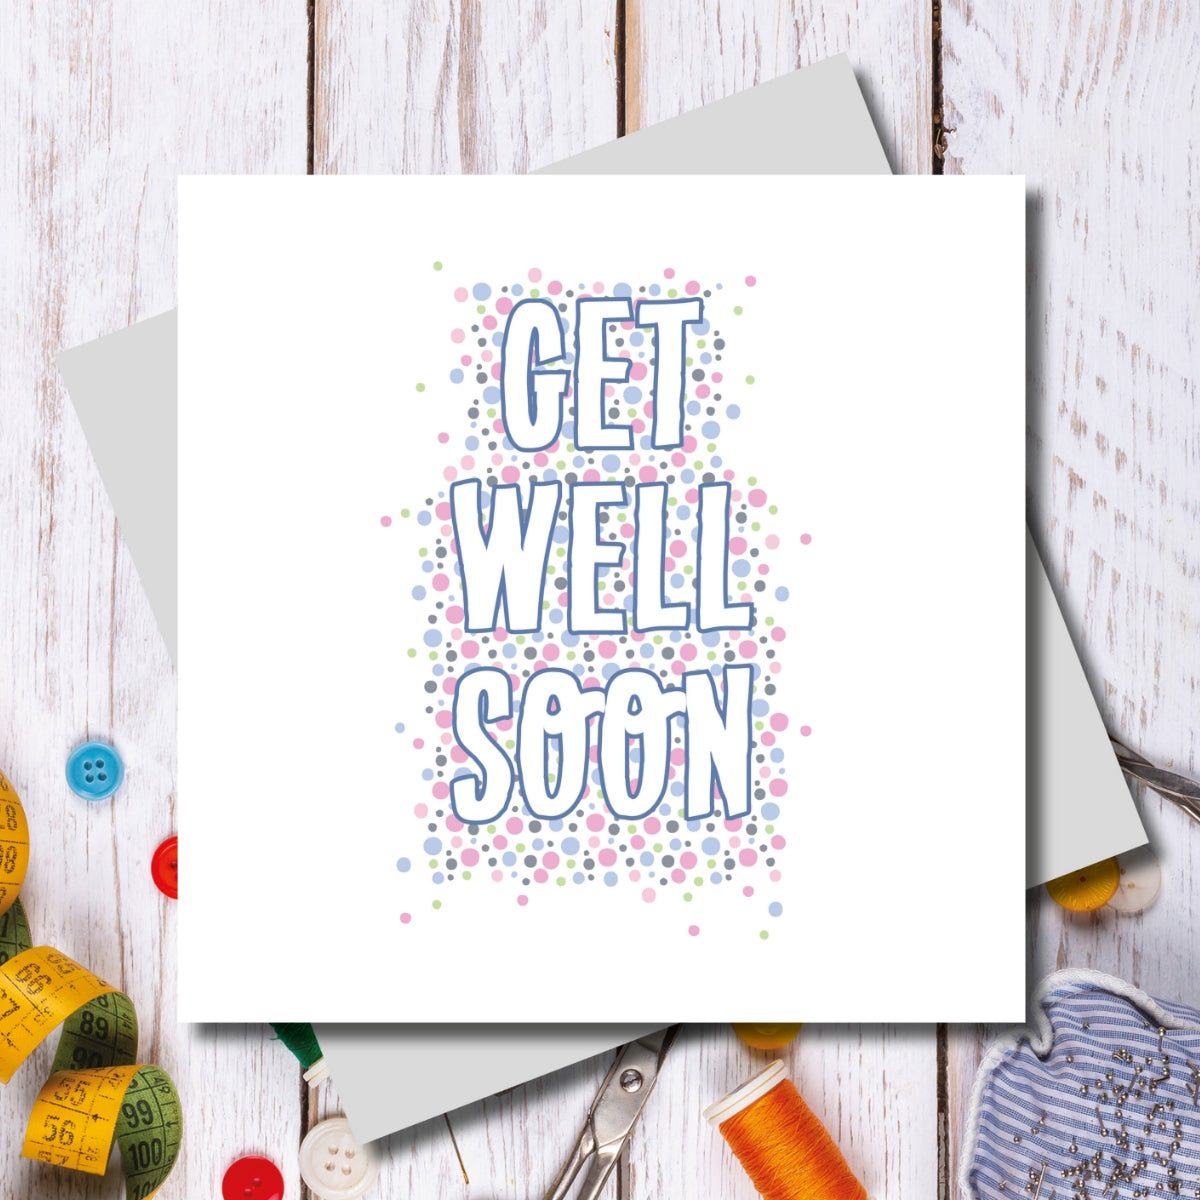 Bowden Get well Greeting Card